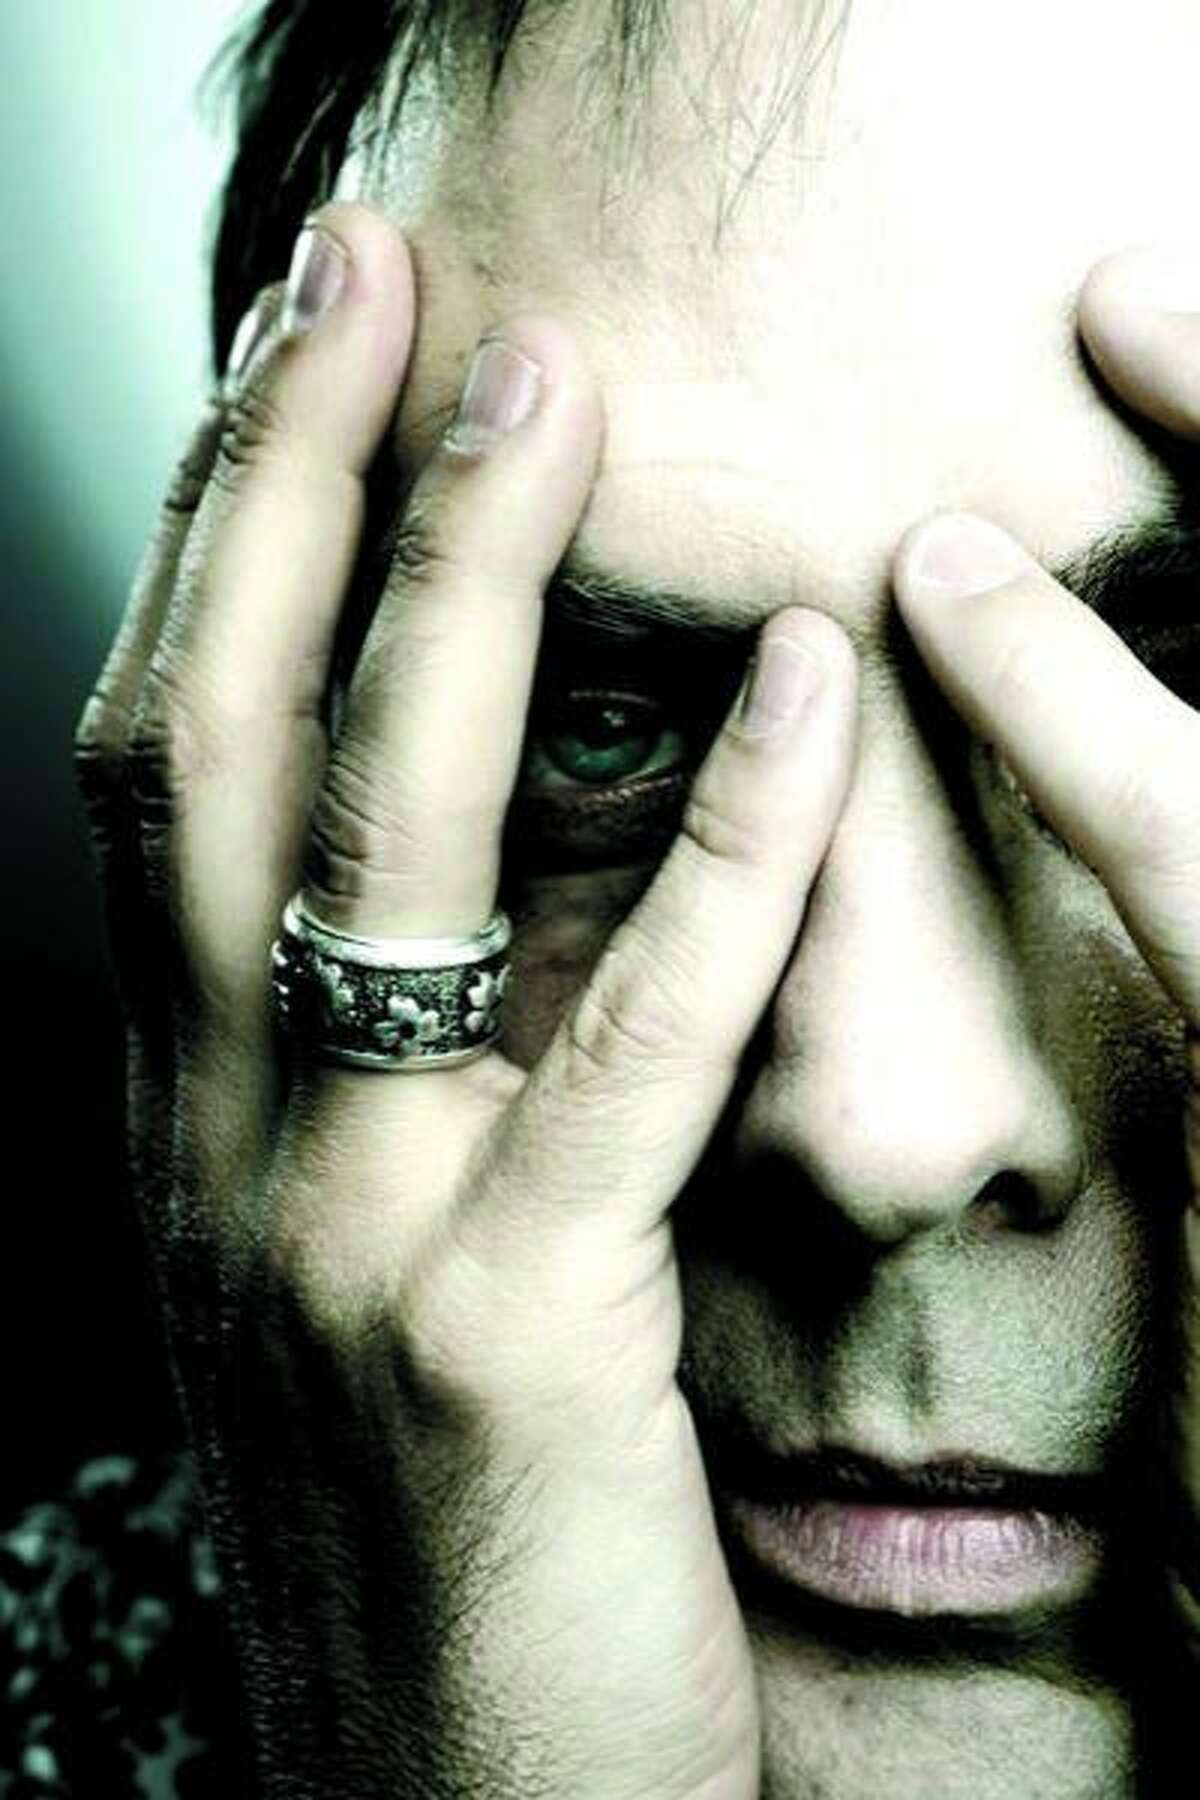 Peter Murphy, former Bauhaus front man, released his solo album "Ninth."